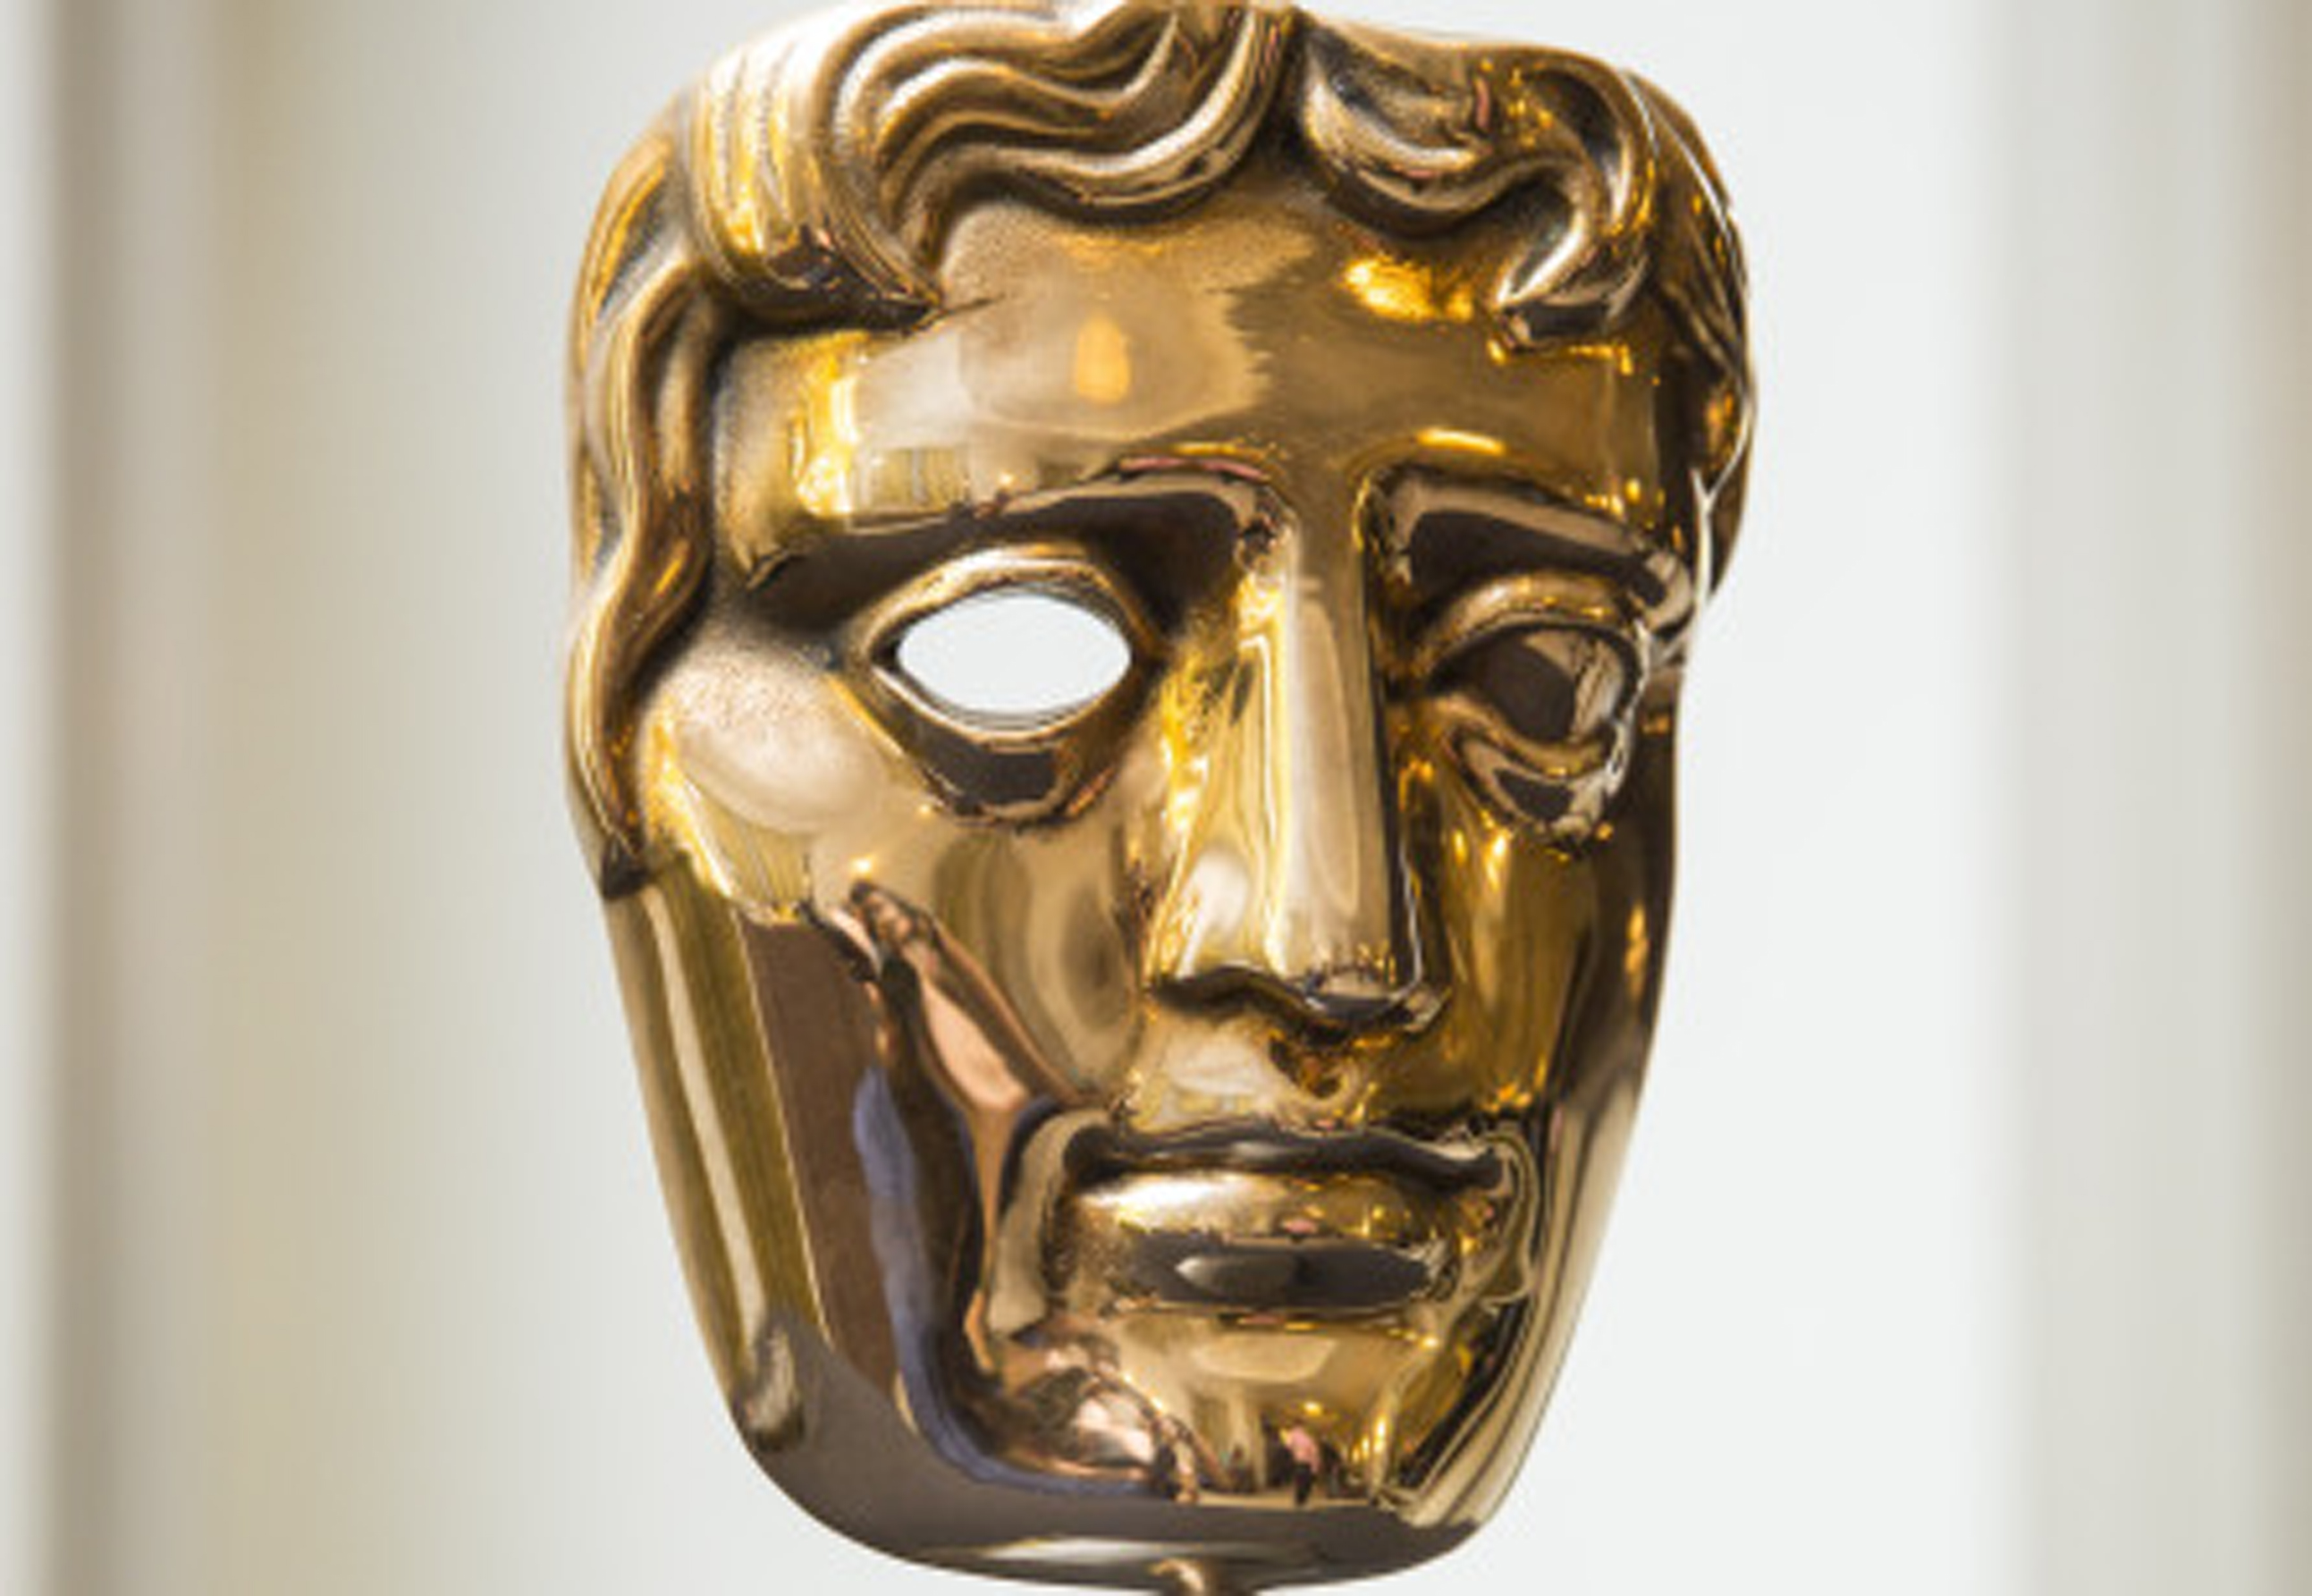 BAFTA Nominations Spark Dreaded #BAFTAsSoWhite Hashtag, Org Says It “Would Have Liked To See More Diversity” - deadline.com